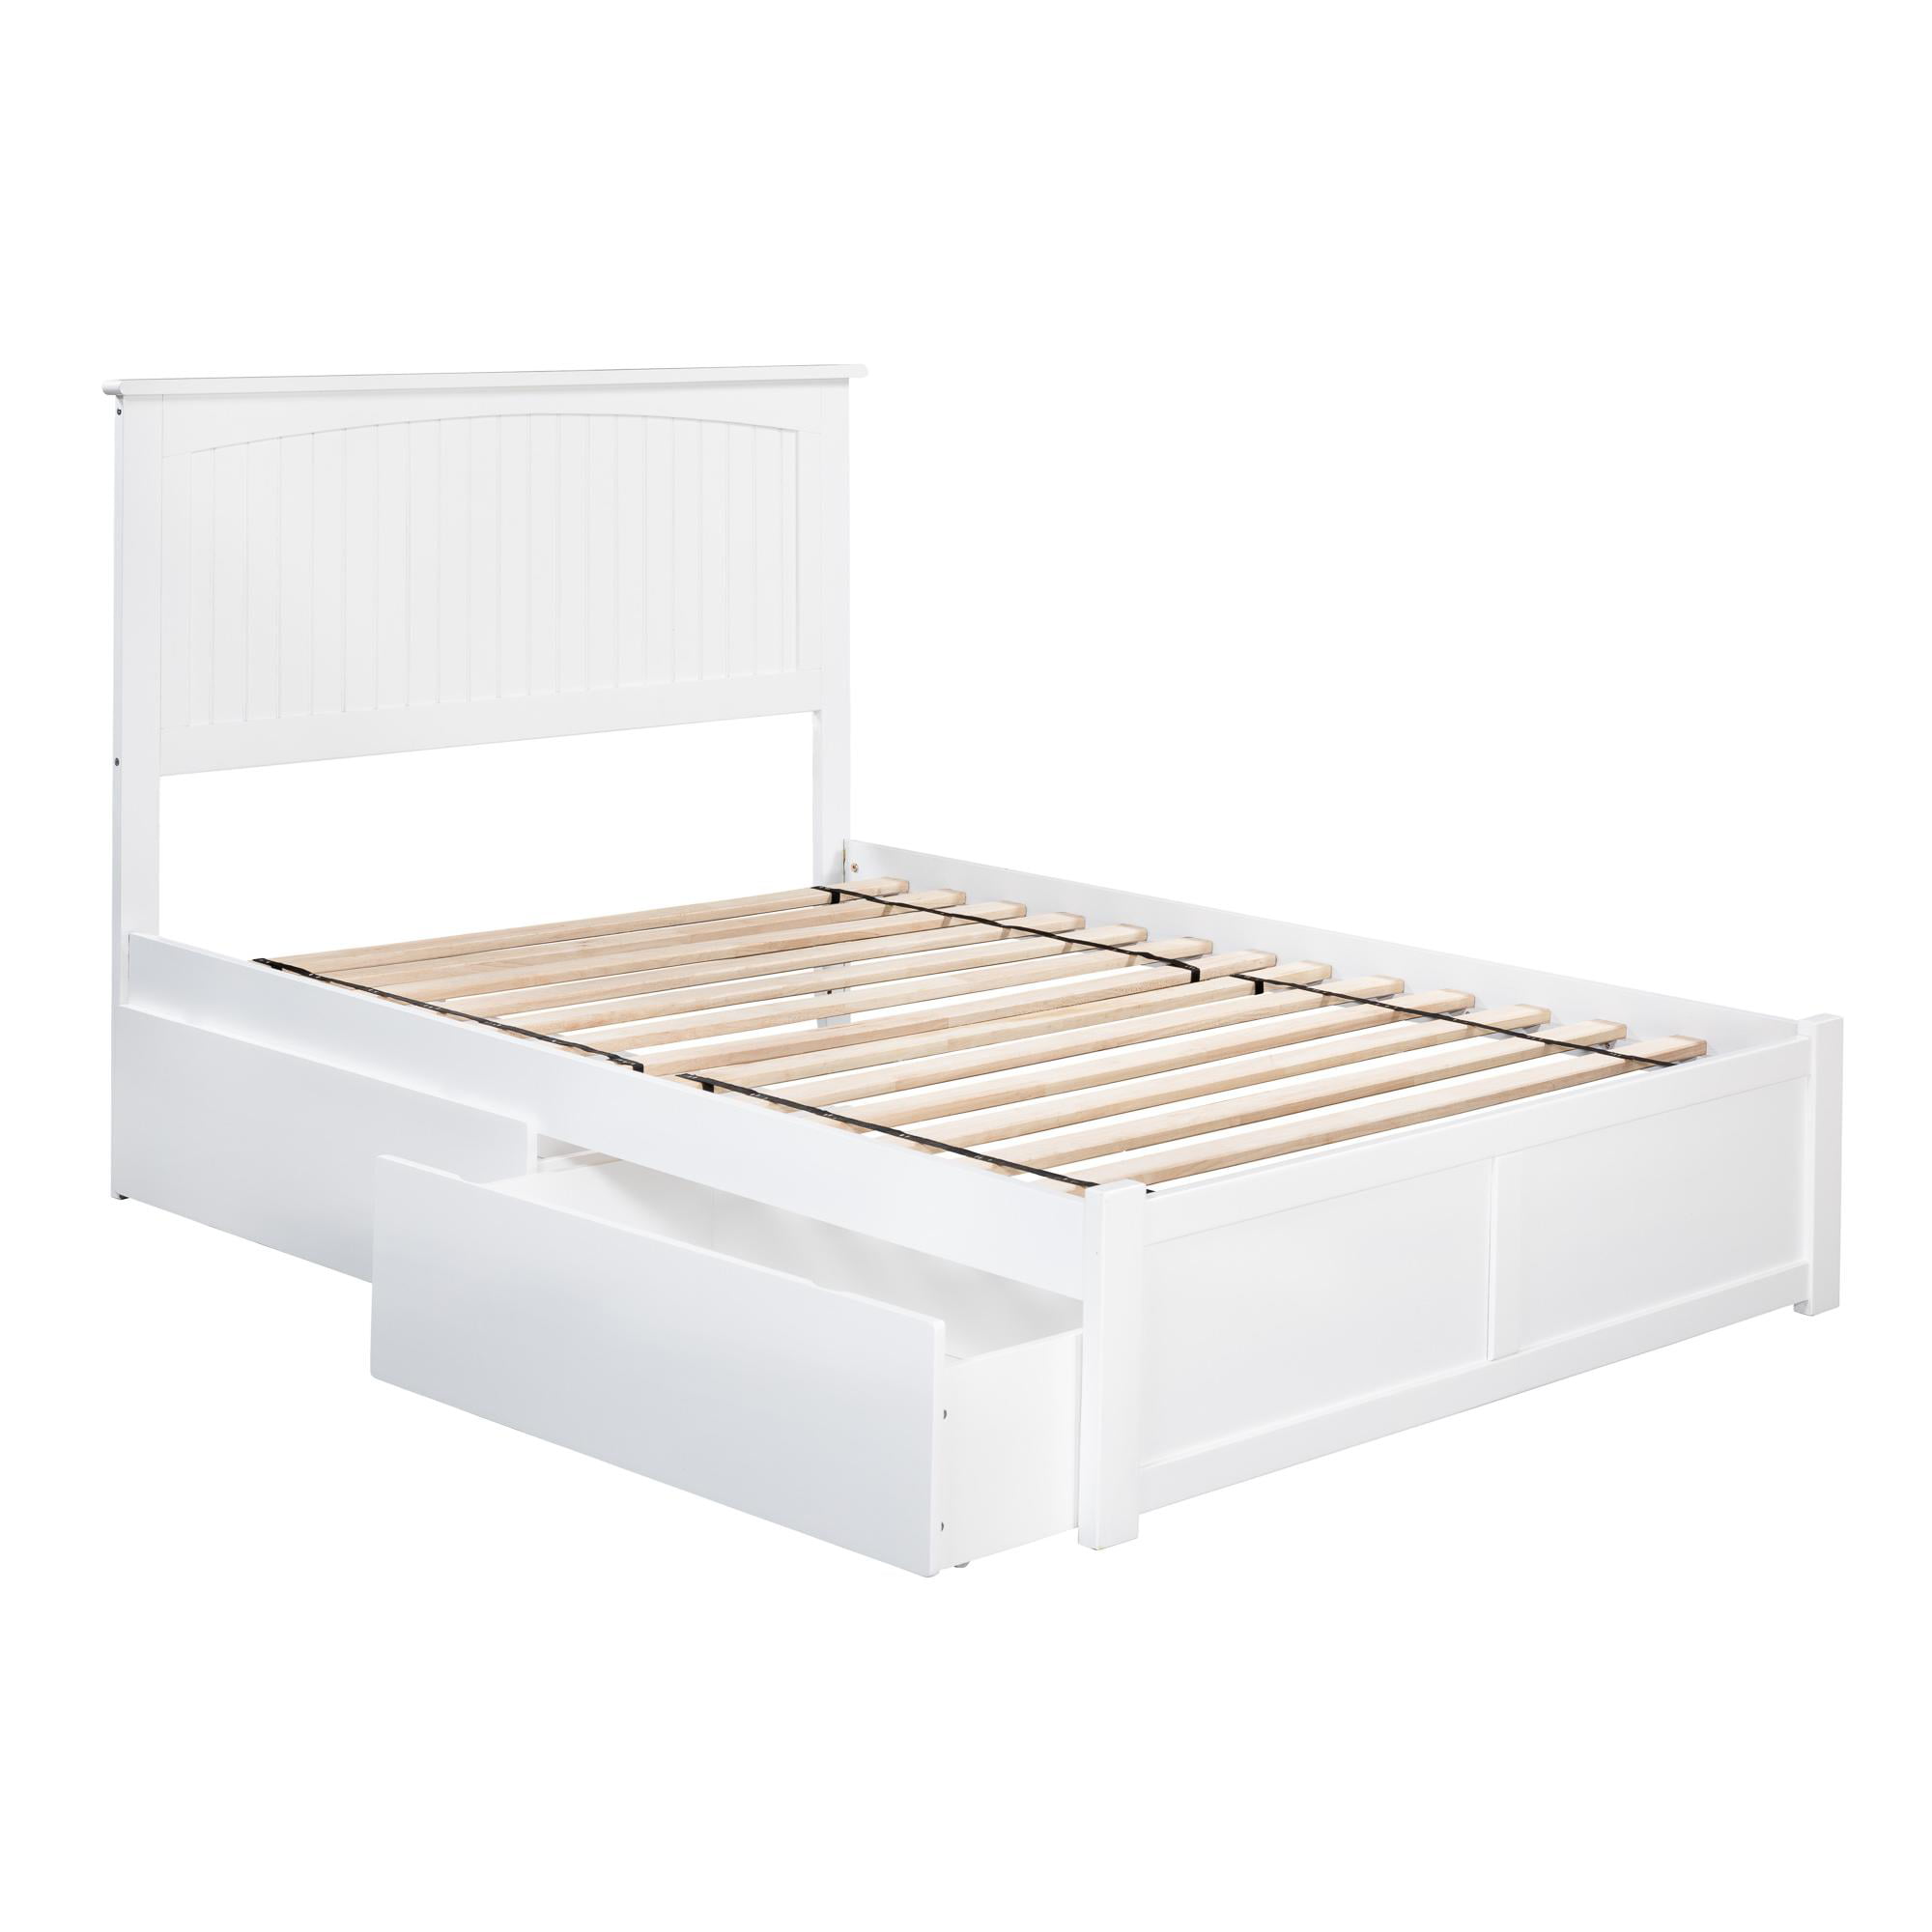 Picture of Atlantic Furniture AR8232112 Nantucket Panel Footboard & Urban Bed Drawers, White - Full